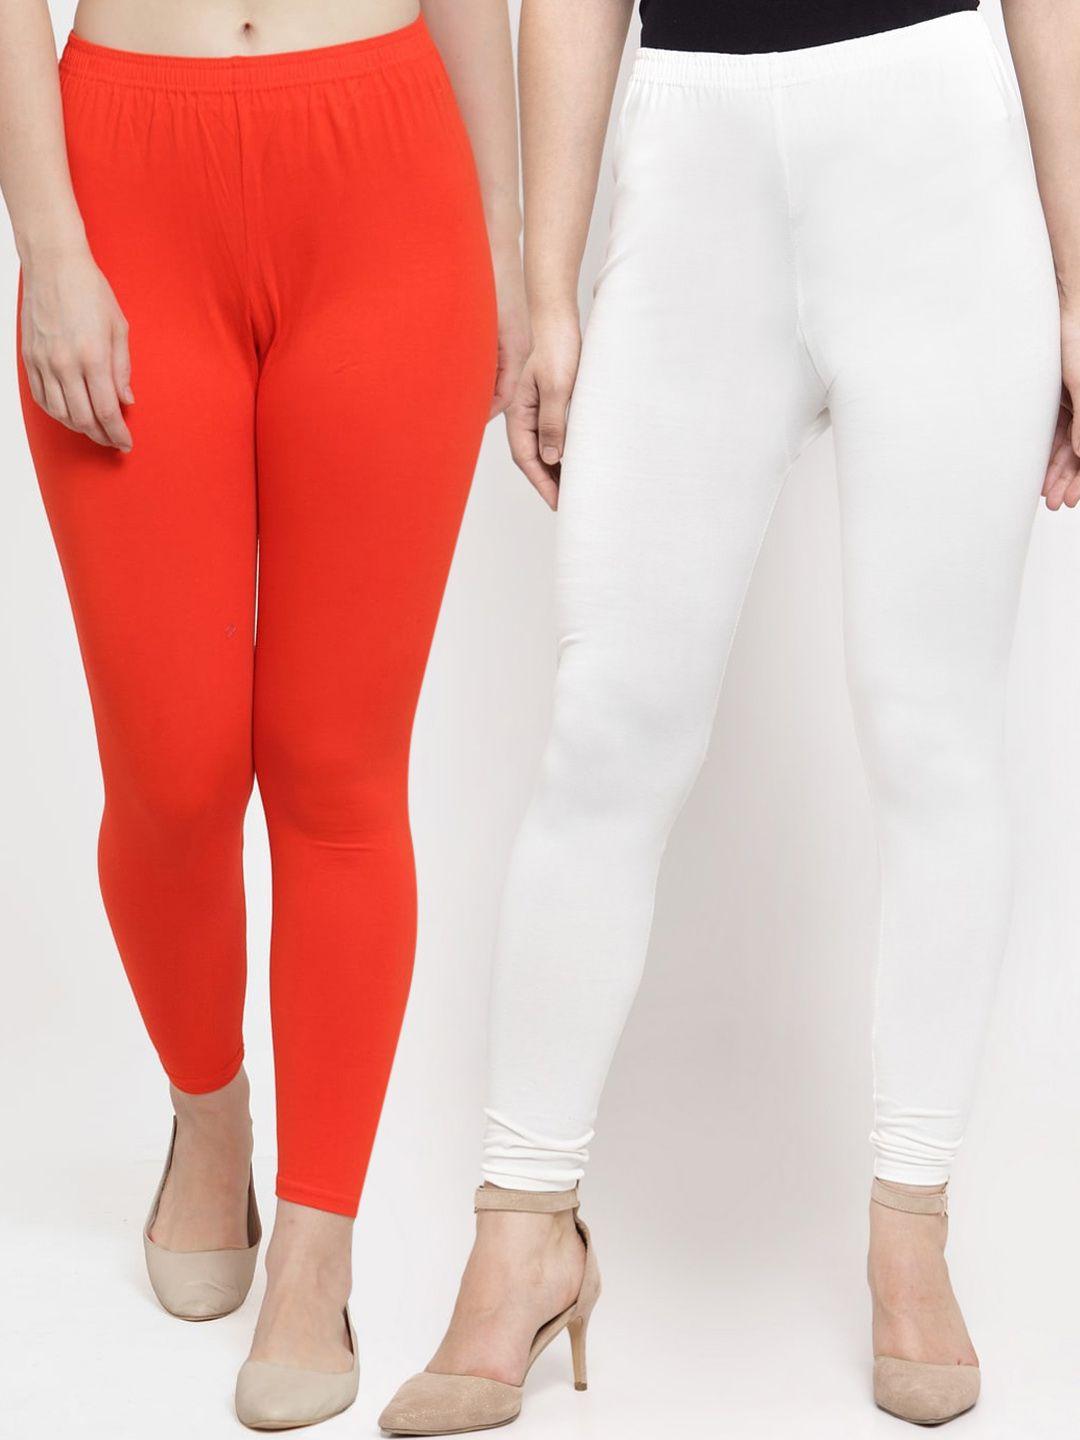 gracit-women-pack-of-2-white-&-orange-colored-solid-ankle-length-leggings